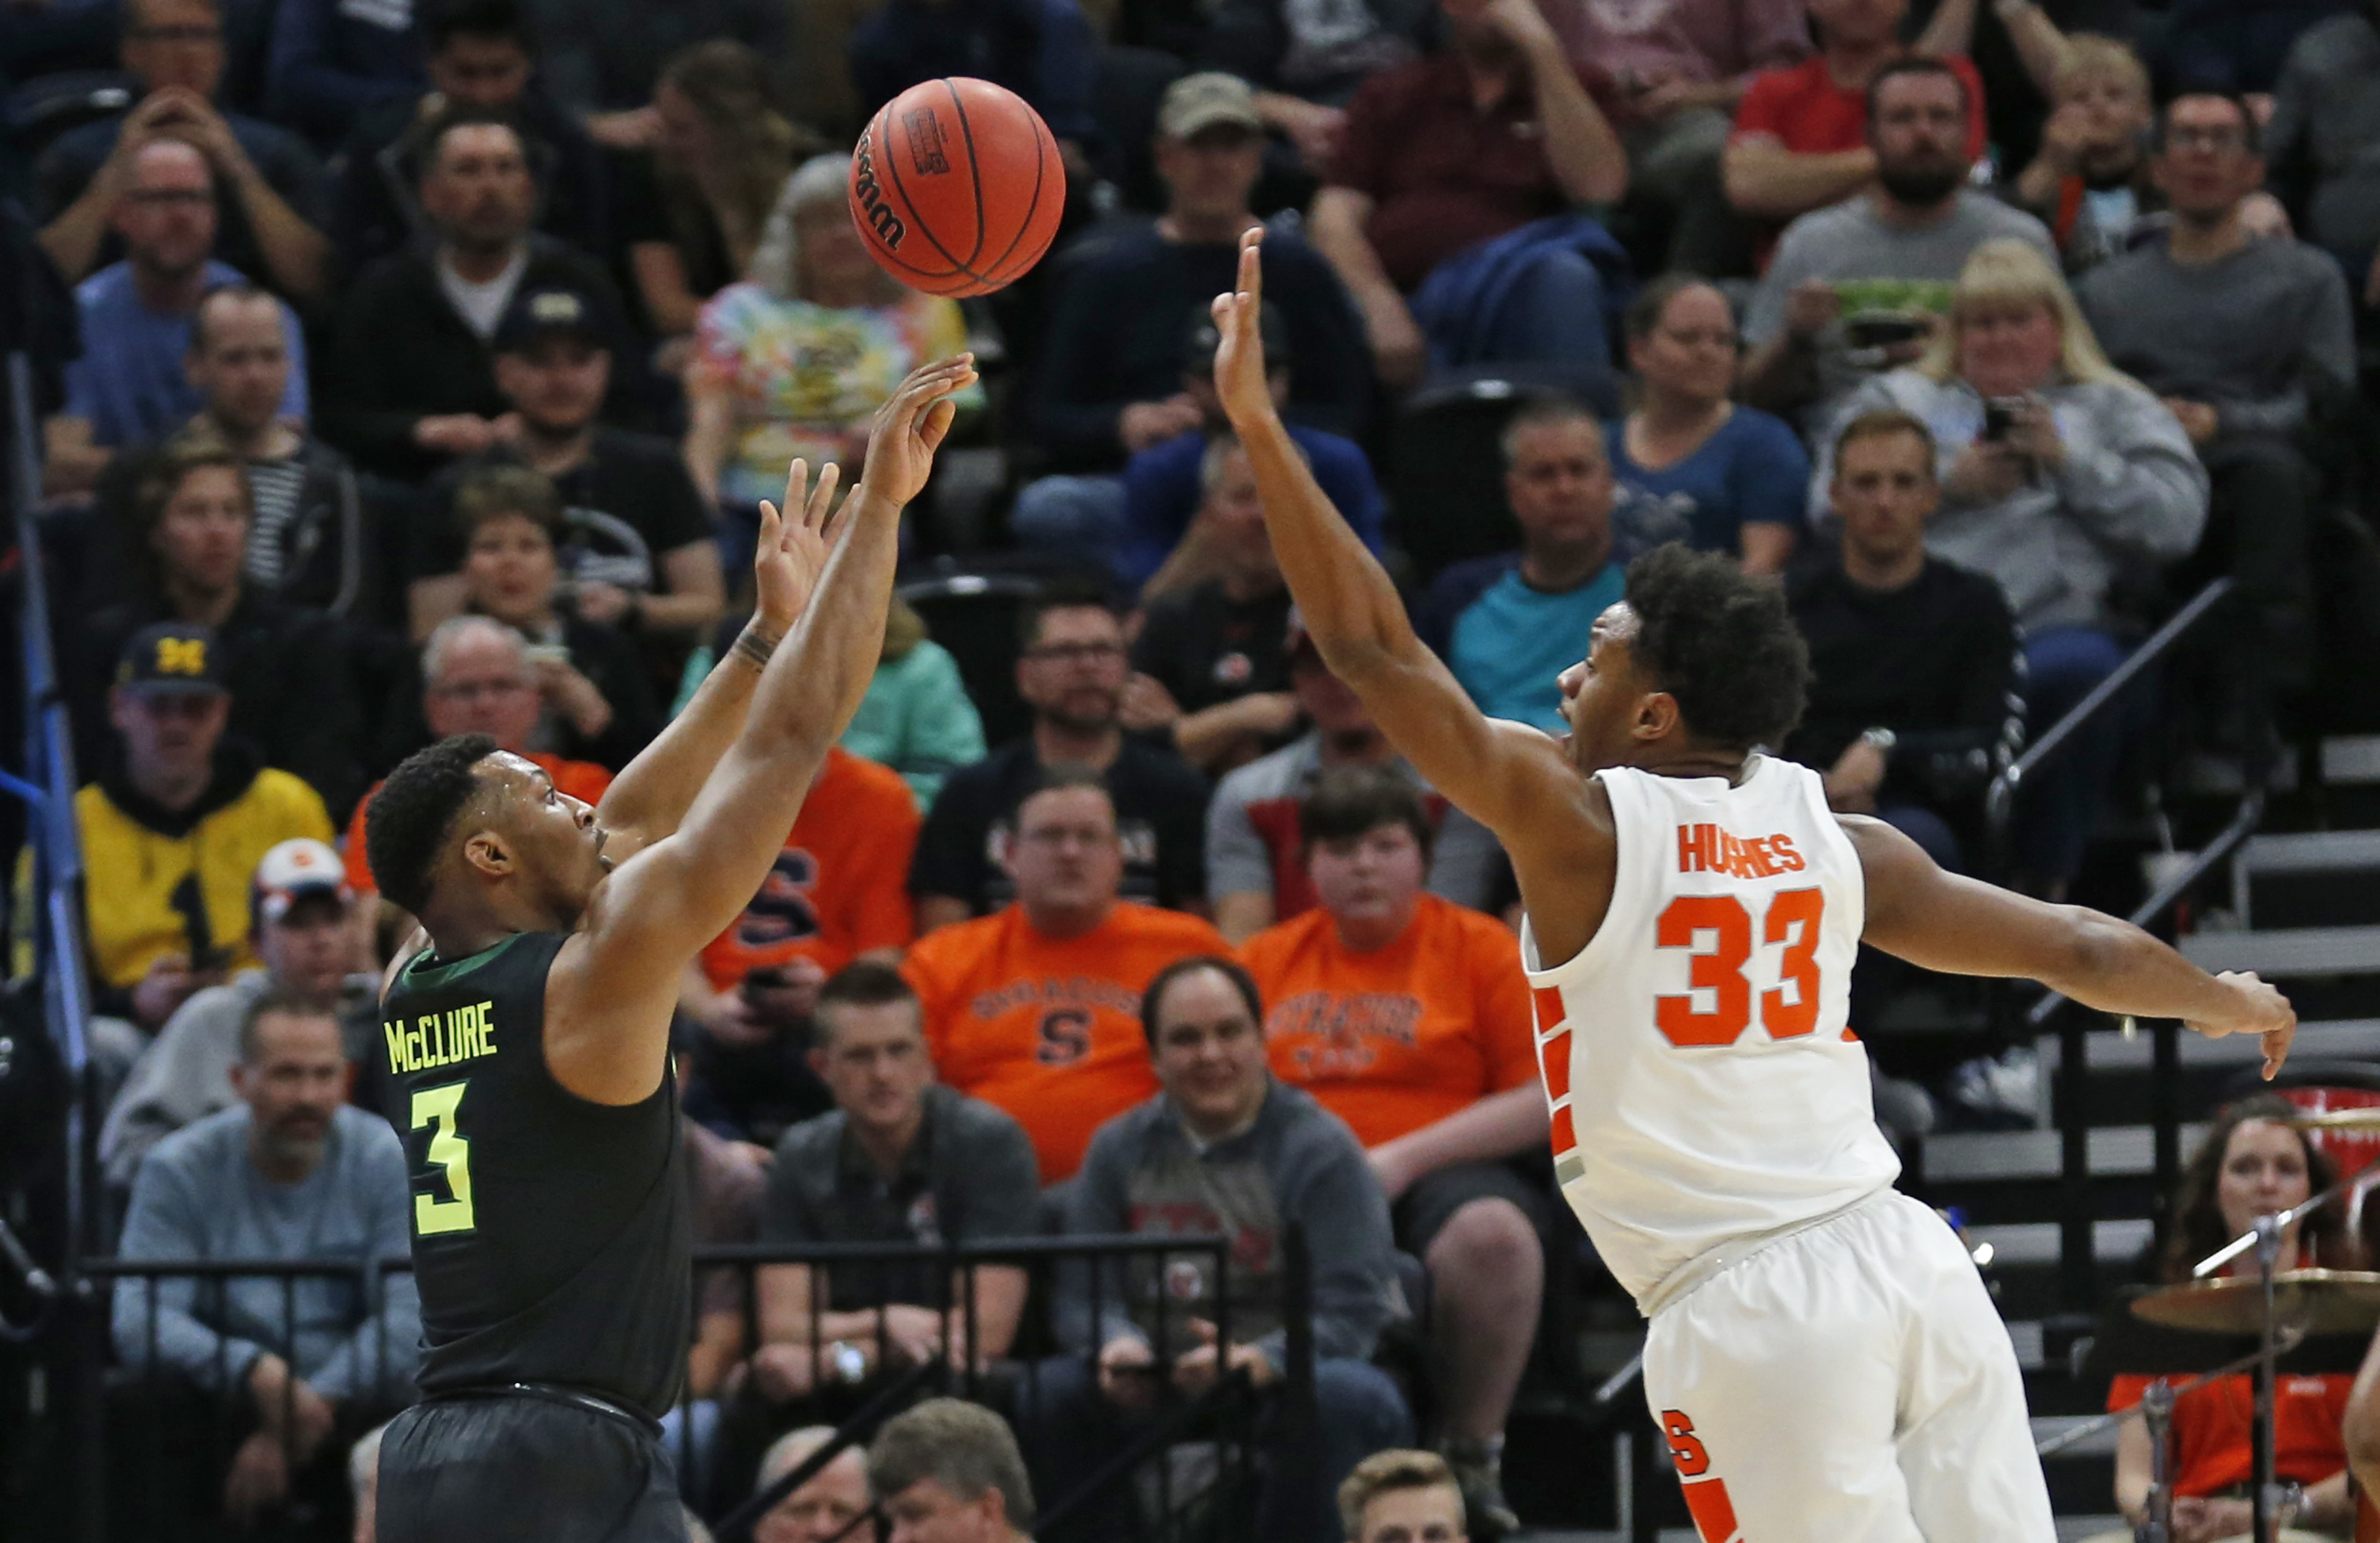 Hot-shooting Bears upset Syracuse in first round of NCAA Tournament | The Baylor Lariat